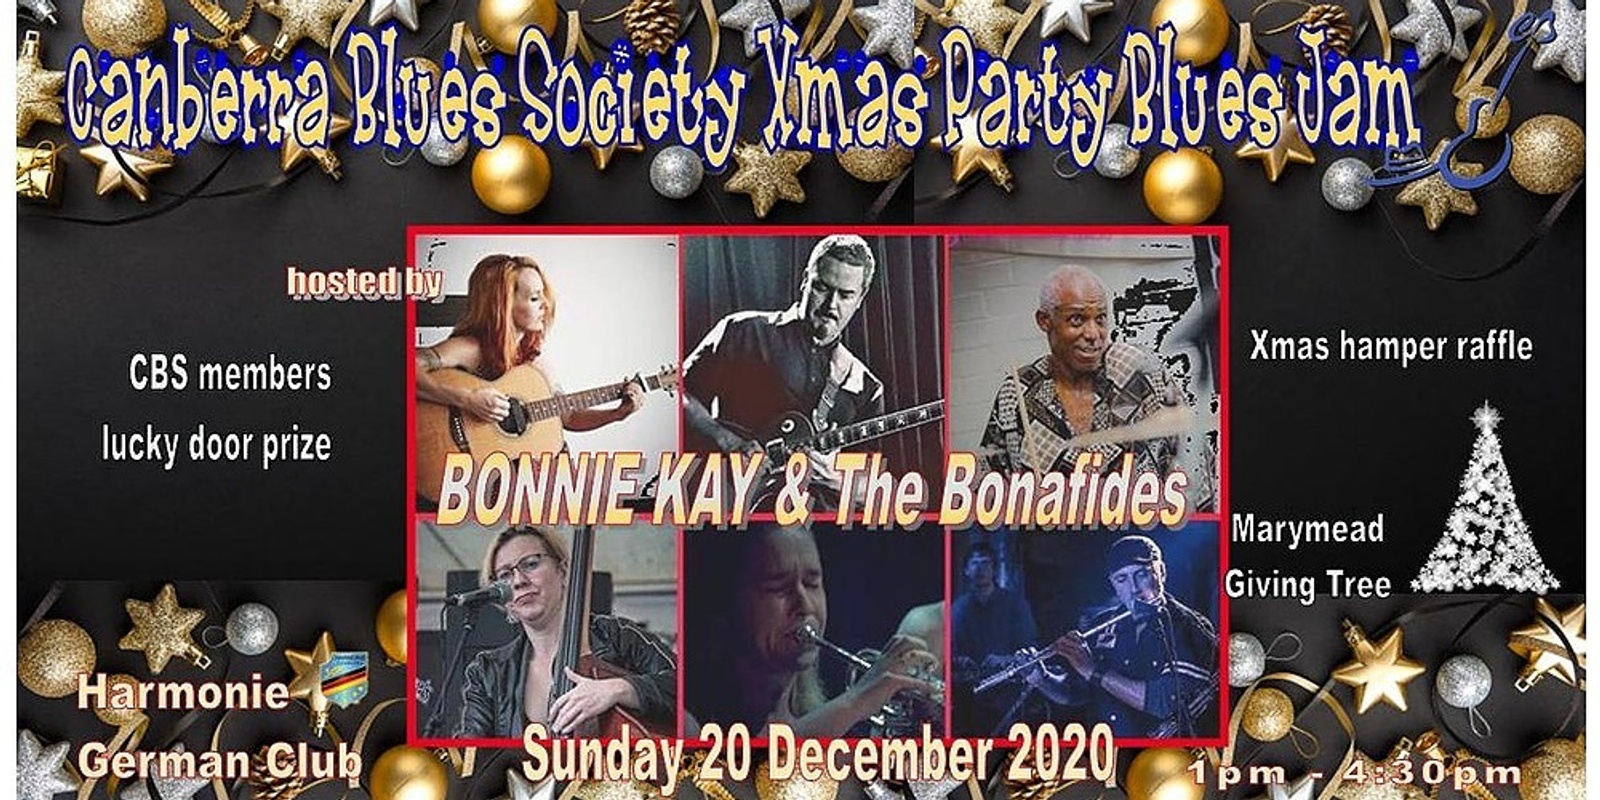 Banner image for CBS XMAS PARTY BLUES JAM hosted by BONNIE KAY & THE BONAFIDES